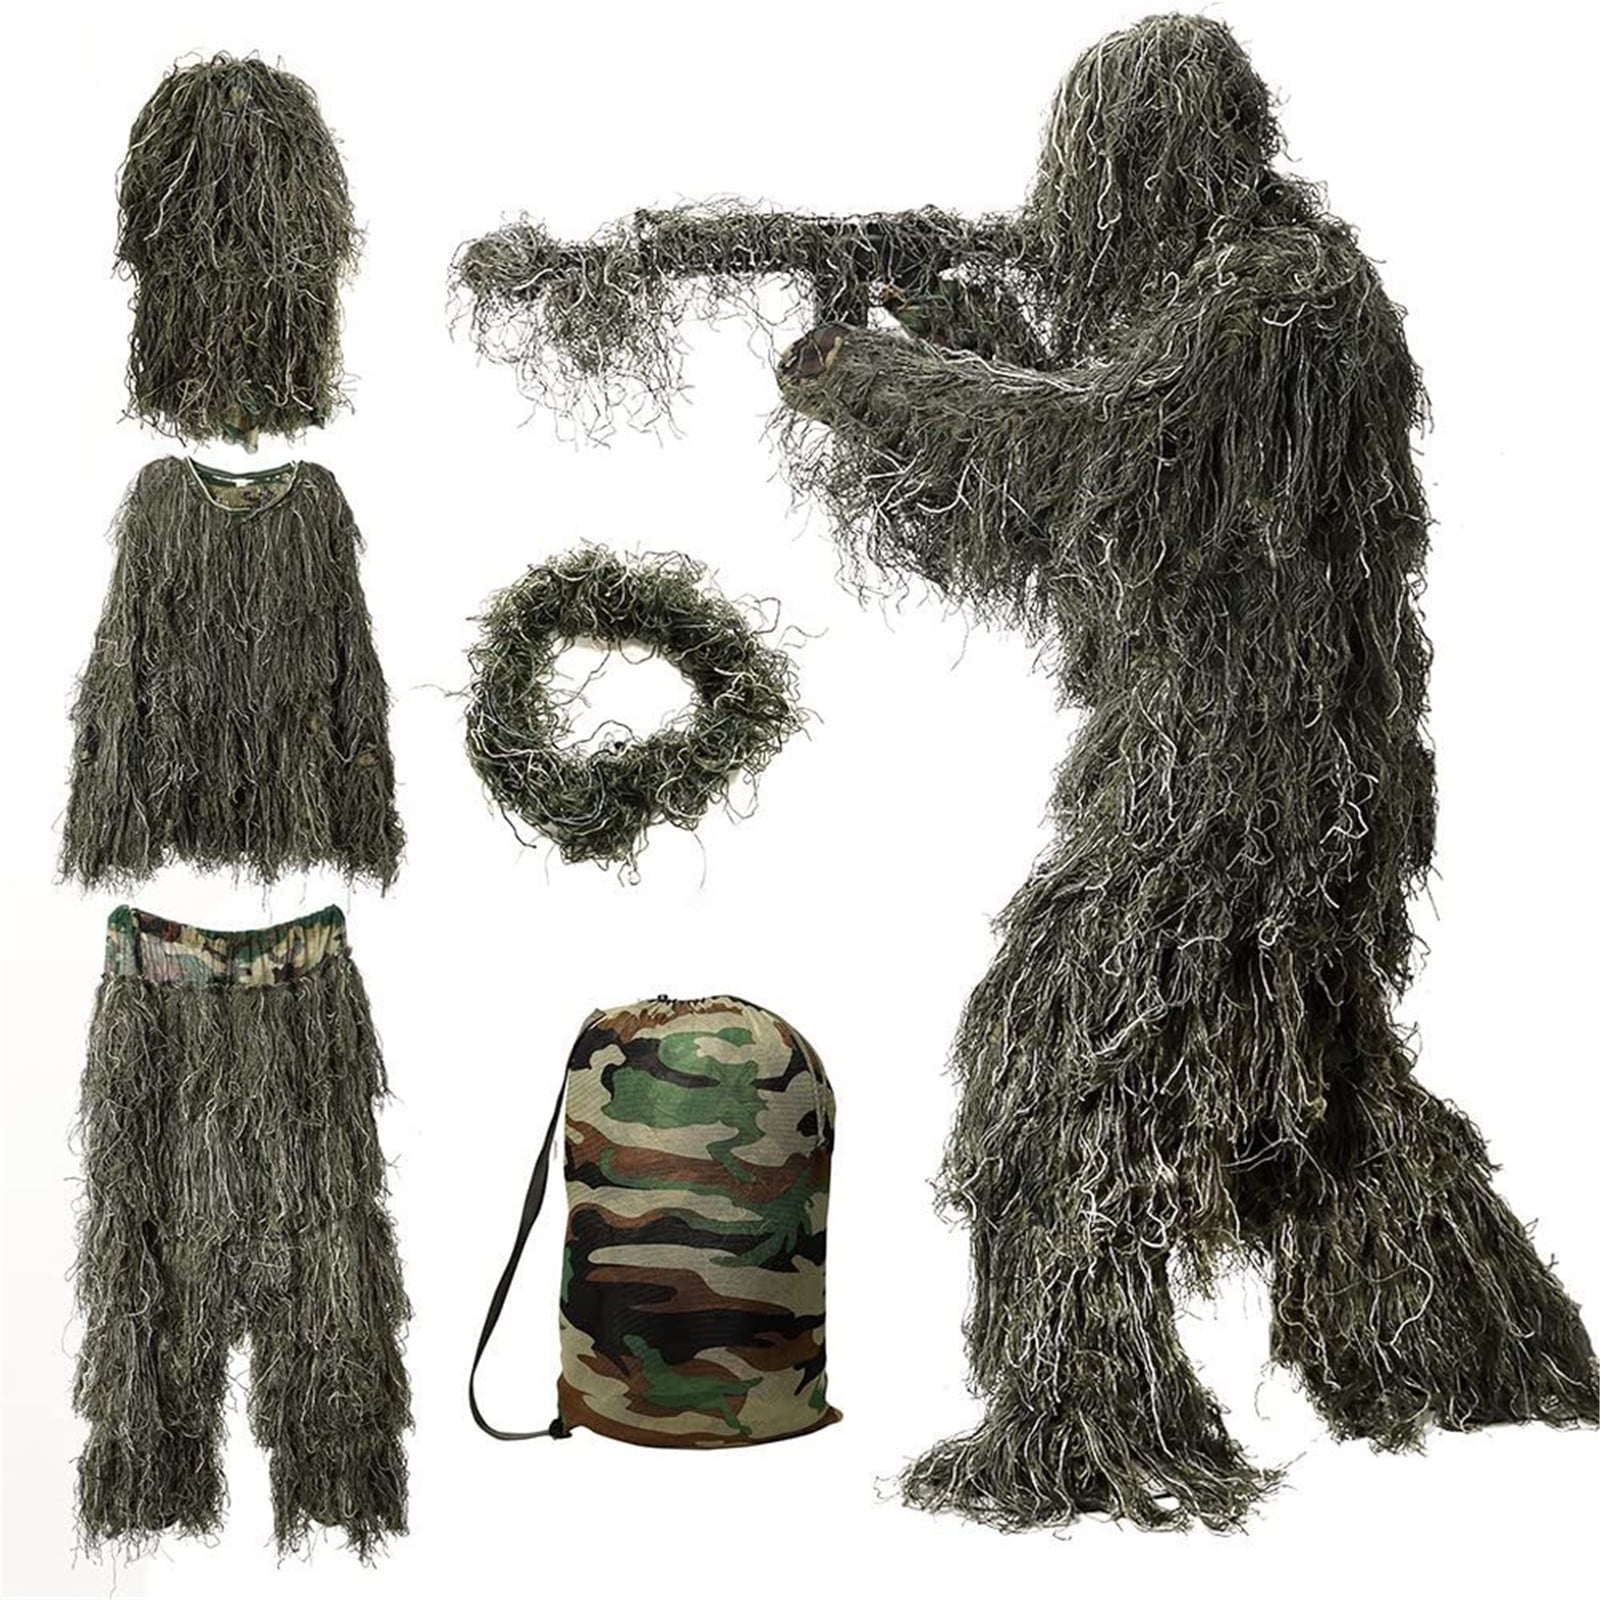 5 in 1 Ghillie Suit, 3D Camouflage Hunting Apparel Camo Jungle Combat ...